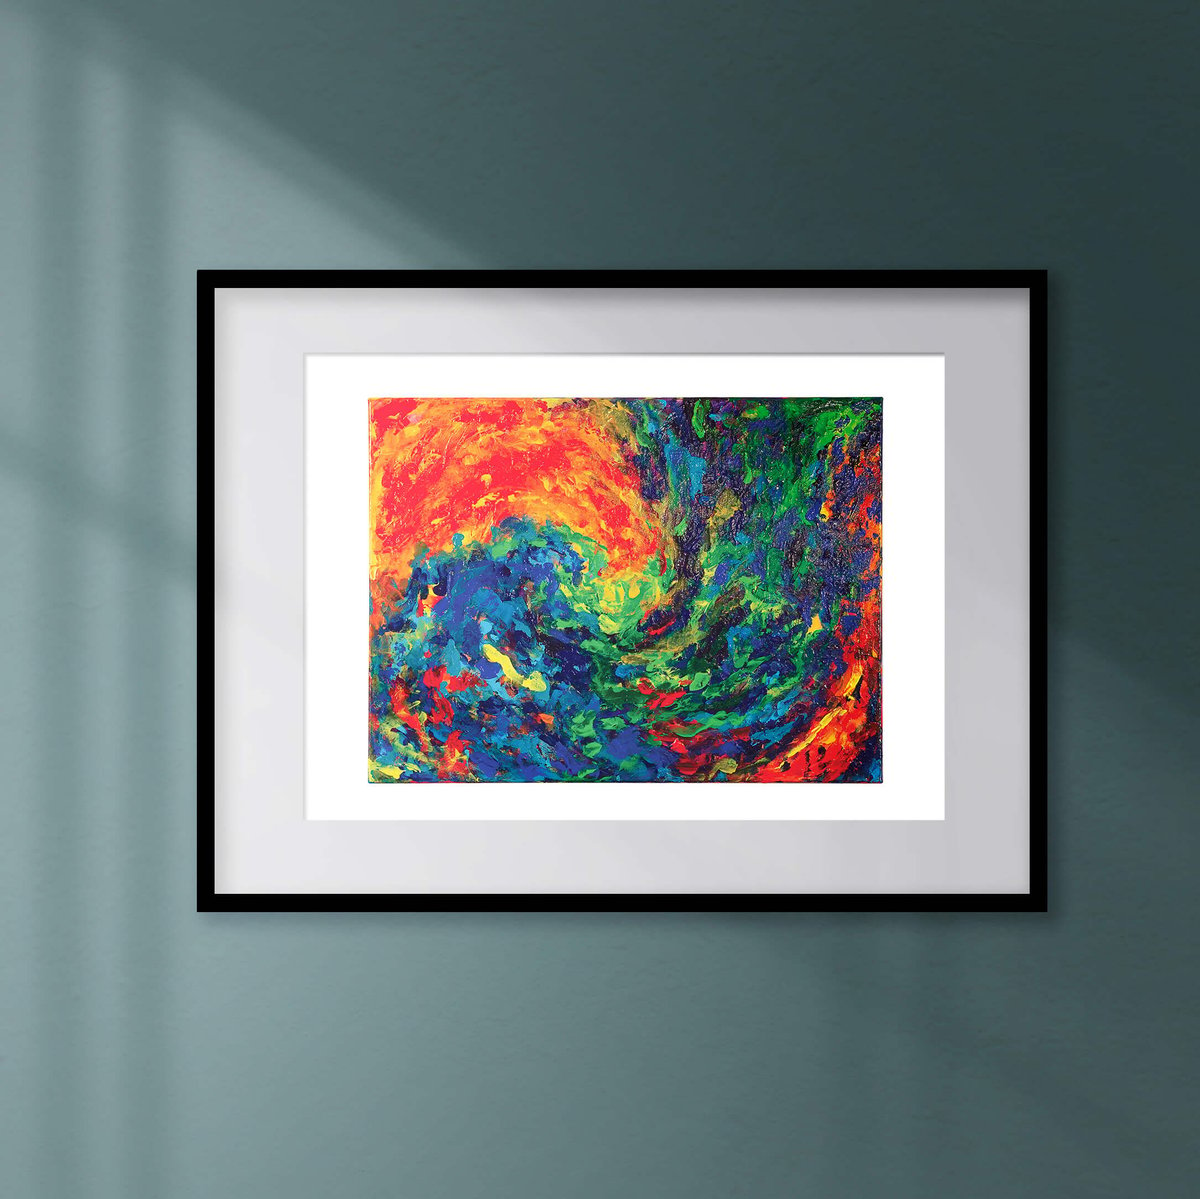 Image of Finding a Way Out - Introspection Collection - Open Edition Art Prints